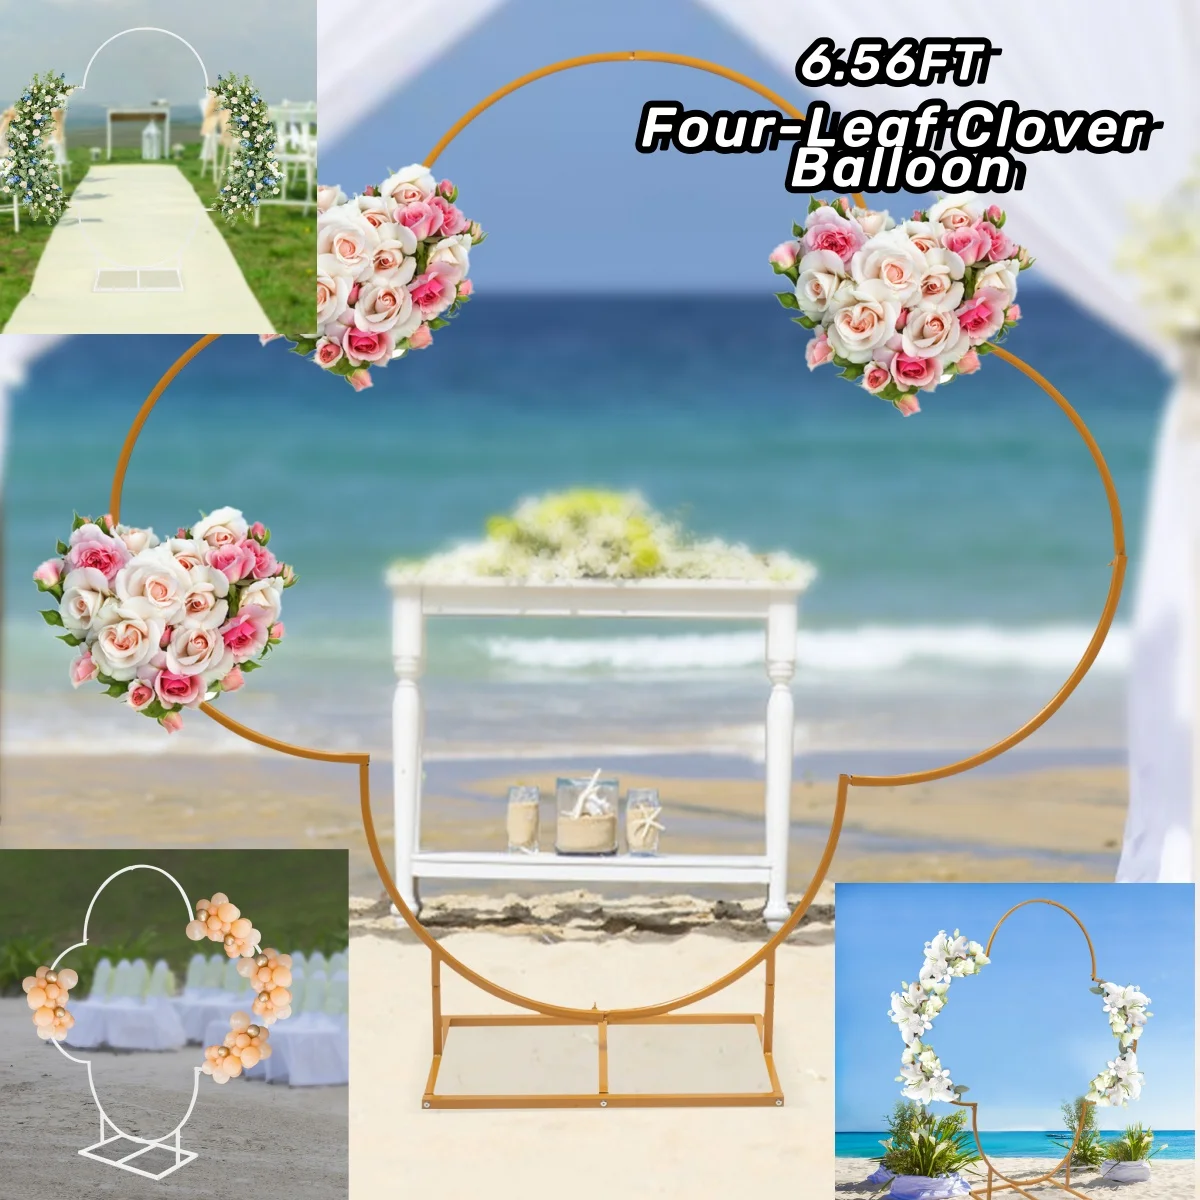 

6.56FT Gold Arch Backdrop Stand Metal Wedding Four-Leaf Clover Balloon Frame for Ceremony Birthday Party Anniversary Decoration